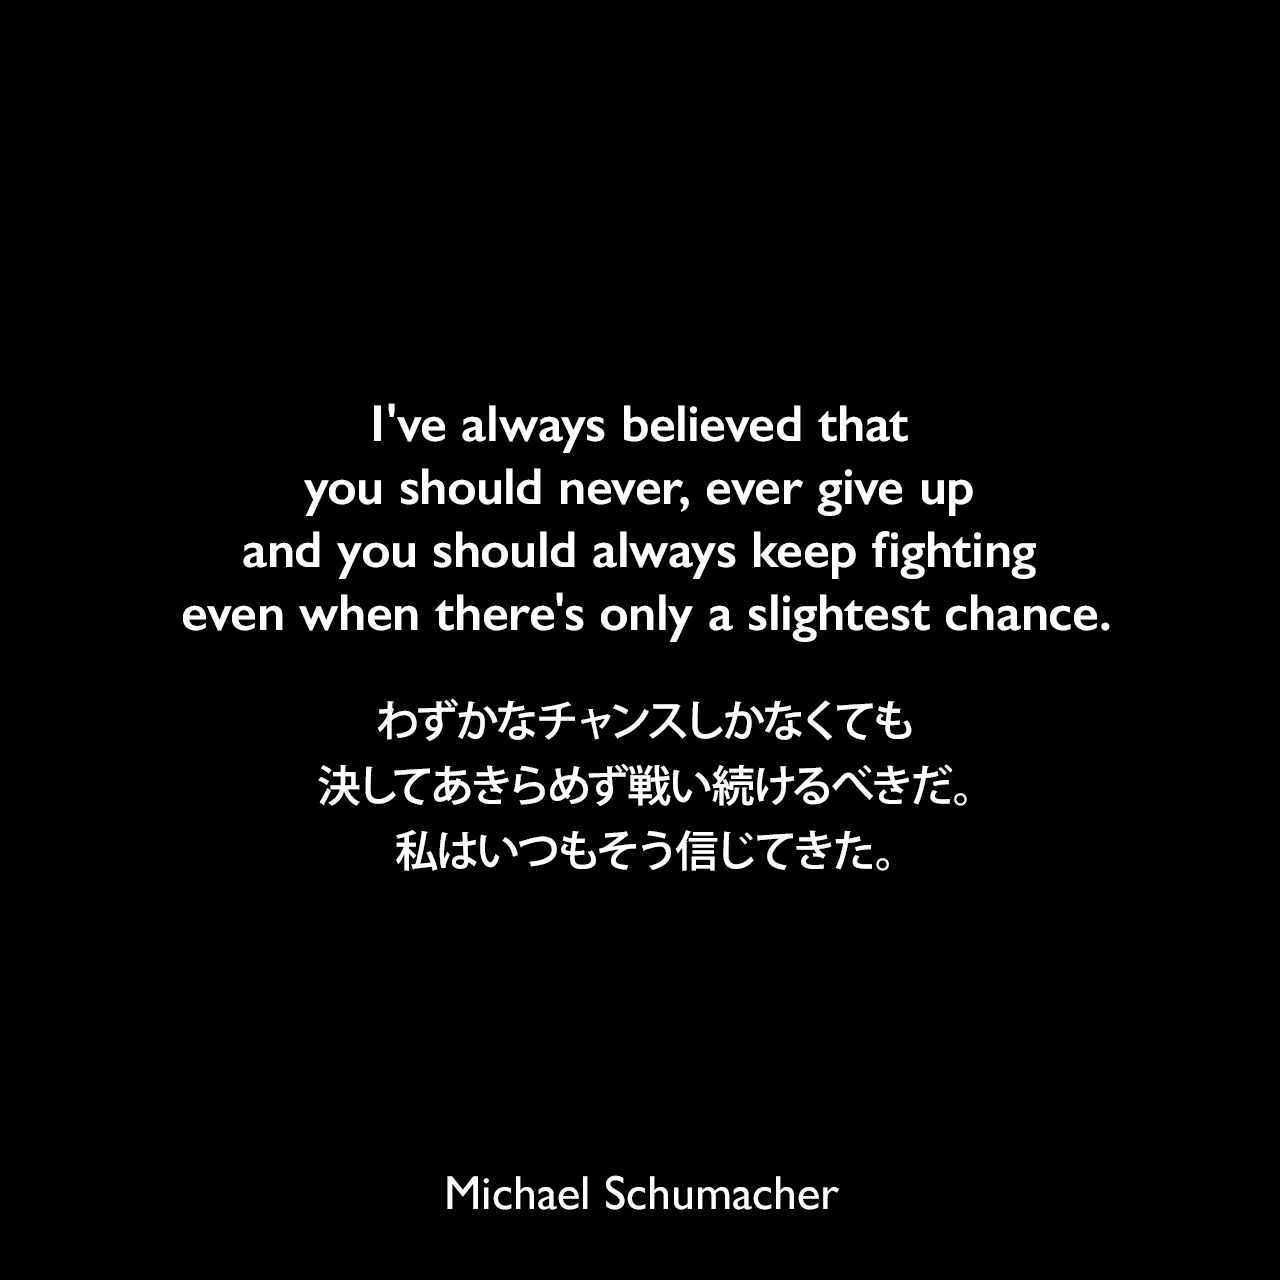 I’ve always believed that you should never, ever give up and you should always keep fighting even when there’s only a slightest chance.わずかなチャンスしかなくても、決してあきらめず戦い続けるべきだ。私はいつもそう信じてきた。